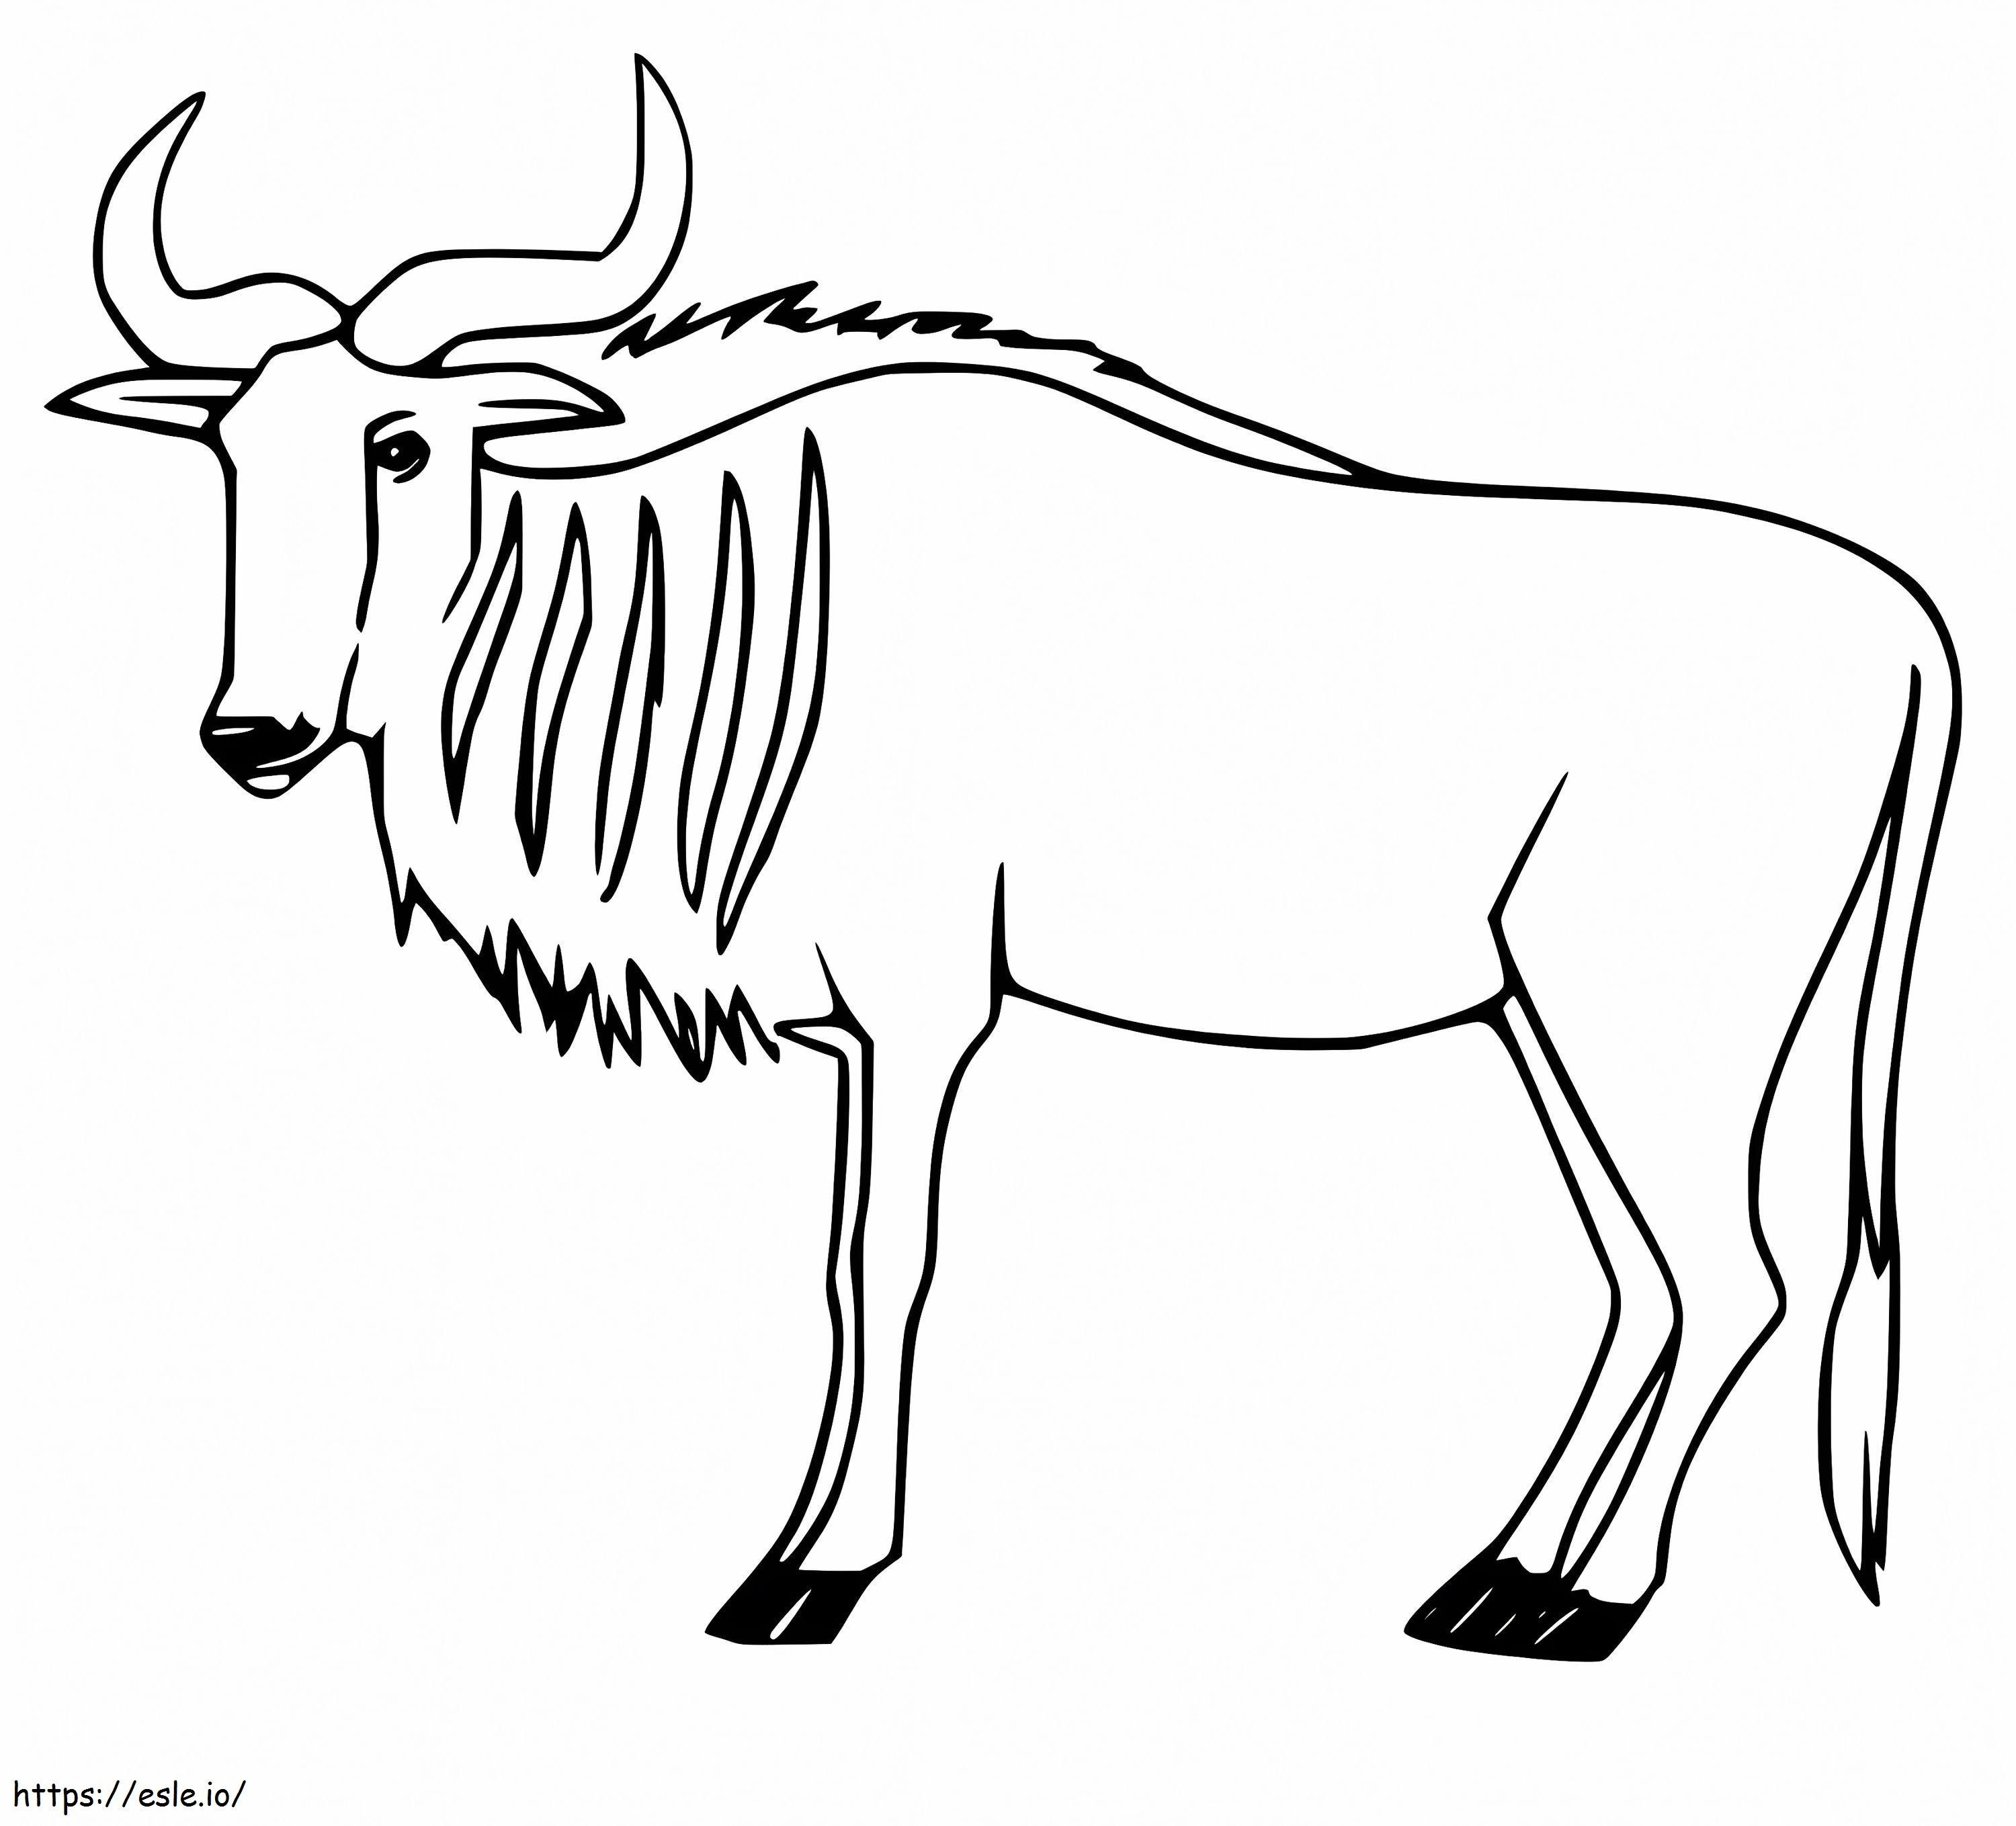 Normal Wildebeest coloring page